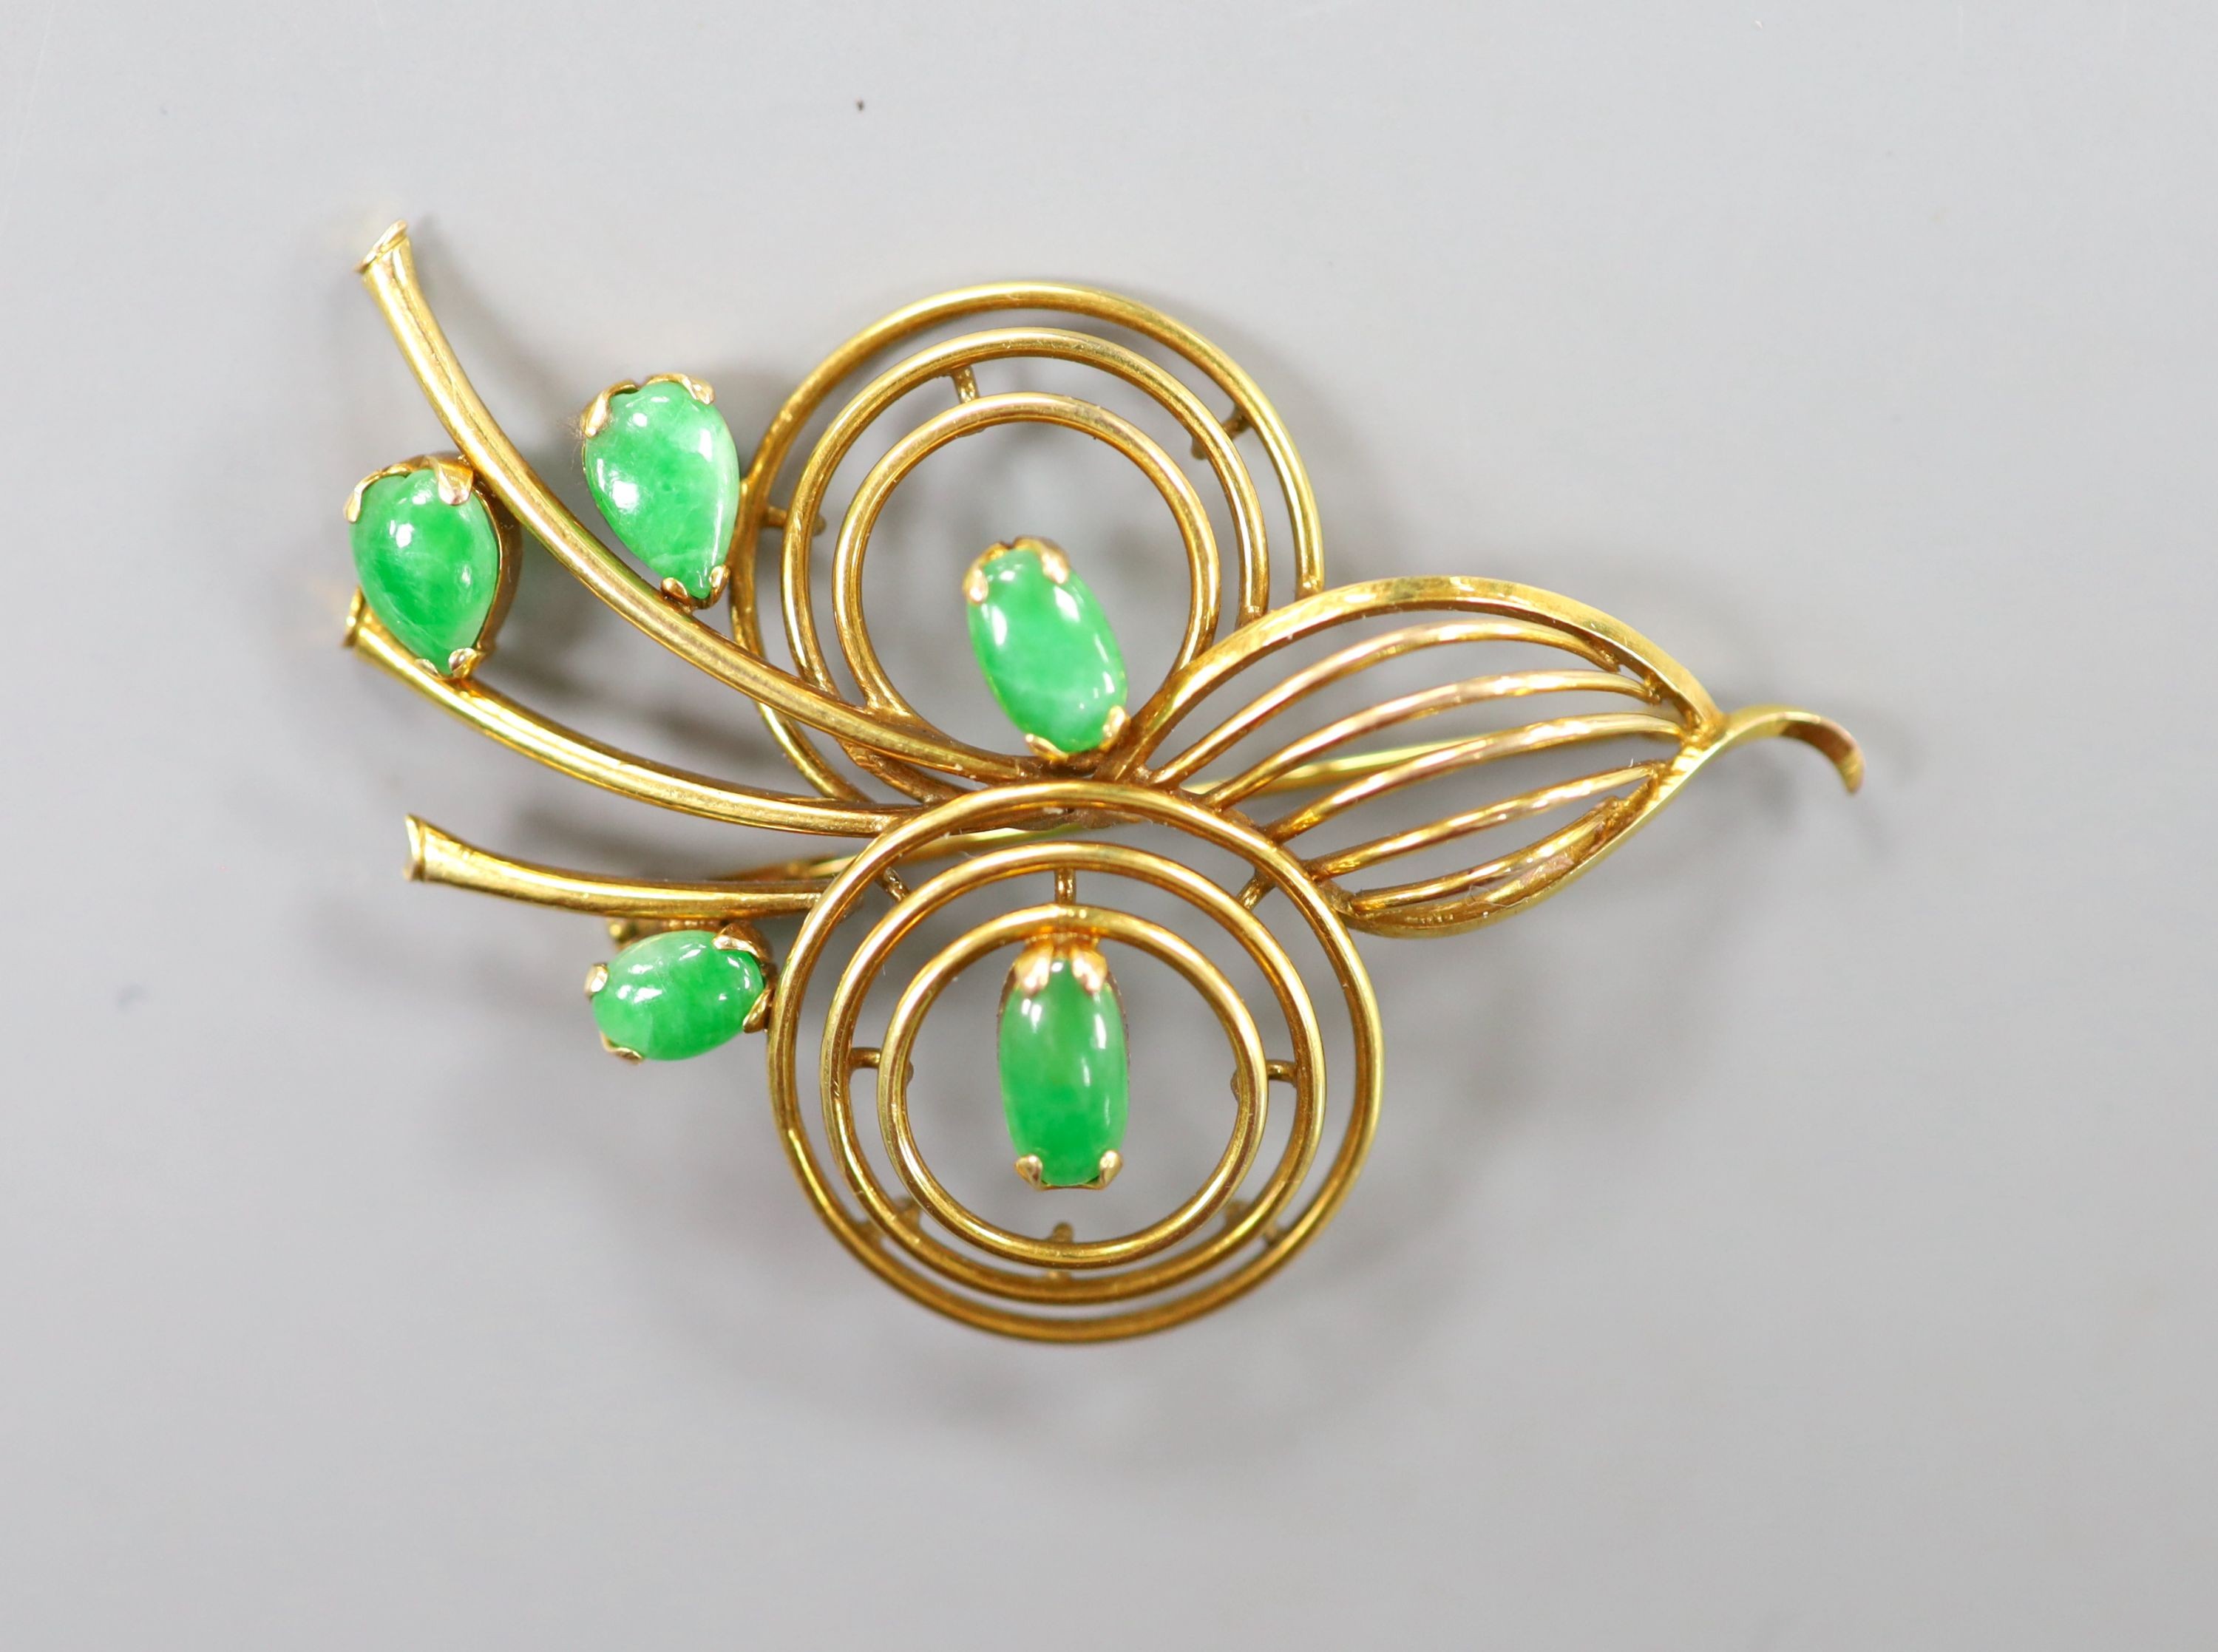 A 14k yellow metal and five stone cabochon jade set stylised spray brooch, 50mm, gross weight 8.9 grams.